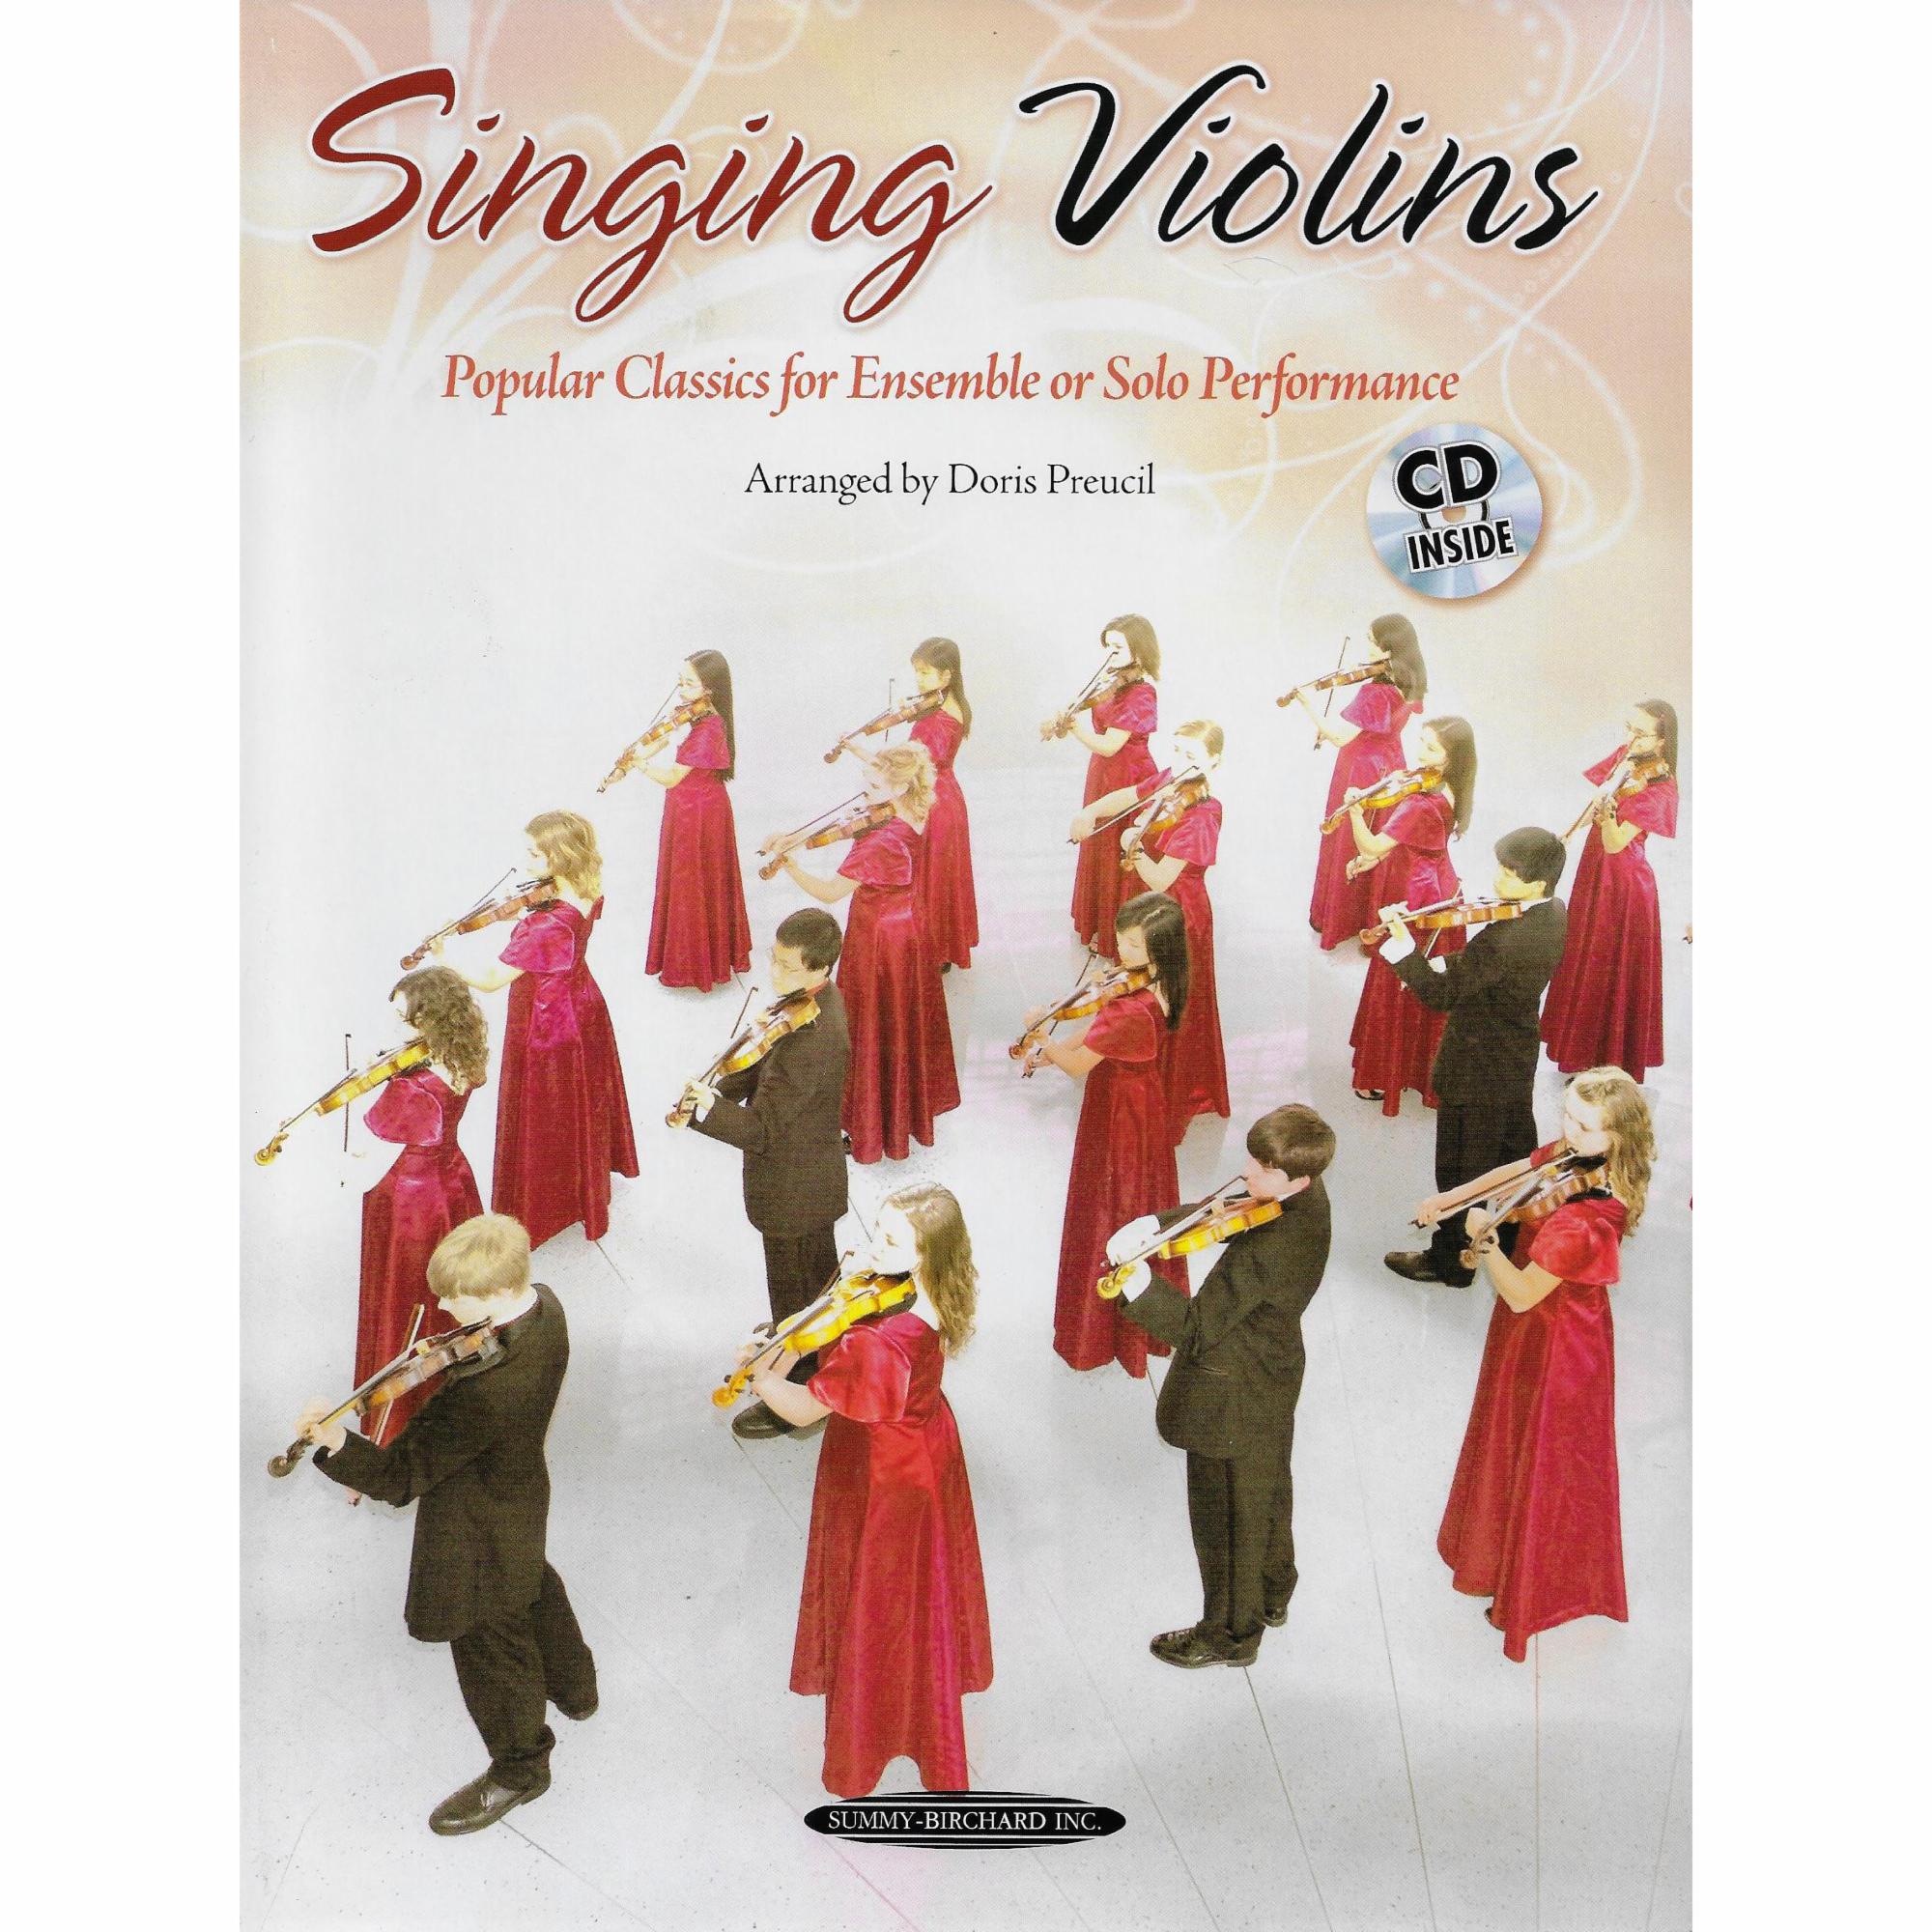 Singing Violins: Popular Classics for Ensemble or Solo Performance